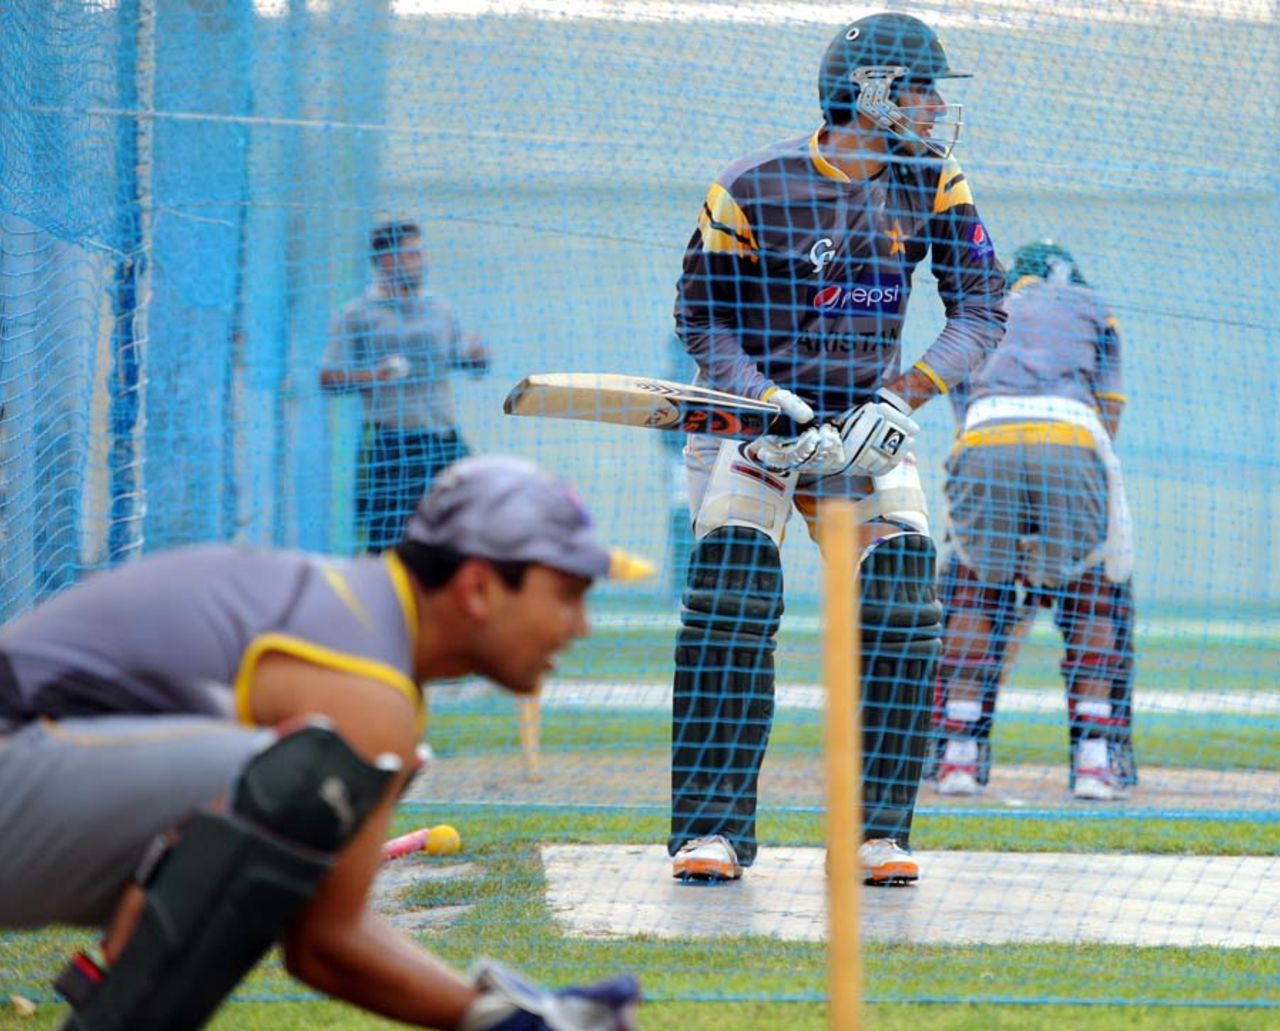 Misbah-ul-Haq (right) and Kamran Akmal train in the nets ahead of the first ODI against Australia, Sharjah, August 27, 2012